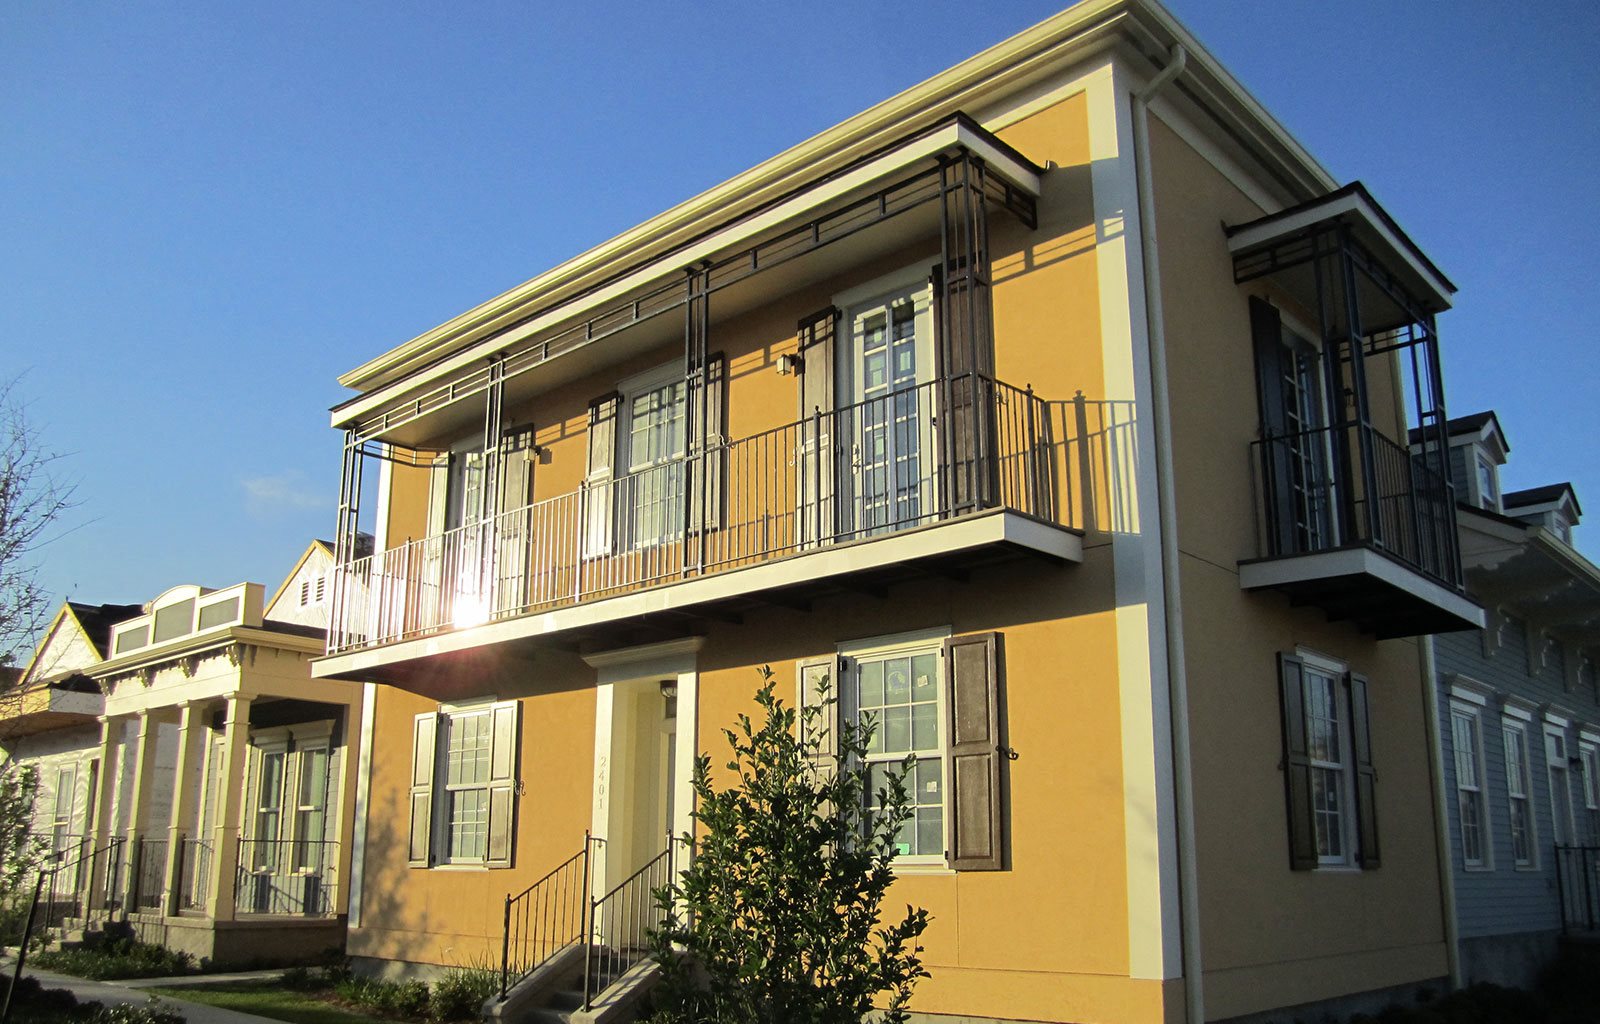 Faubourg LaFitte Apartments in New Orleans, LA